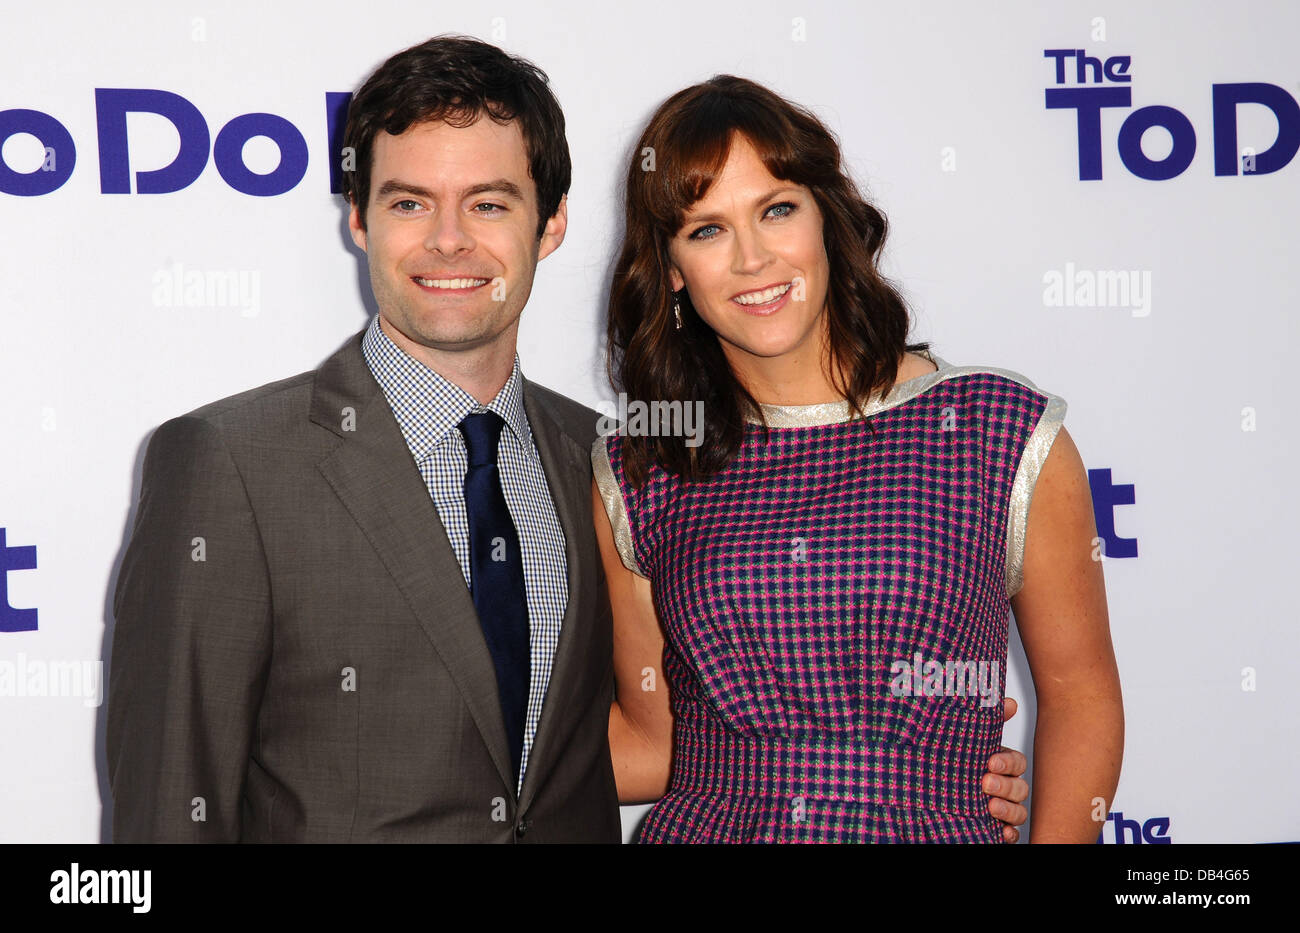 Los Angeles, California, USA. 23rd July, 2013. Bill Hader, Maggie Carey attending the Los Angeles Premiere of ''The To Do List'' held at the Regency Bruin Theater in Westwood, California on July 23 2013. 2013. Credit:  D. Long/Globe Photos/ZUMAPRESS.com/Alamy Live News Stock Photo